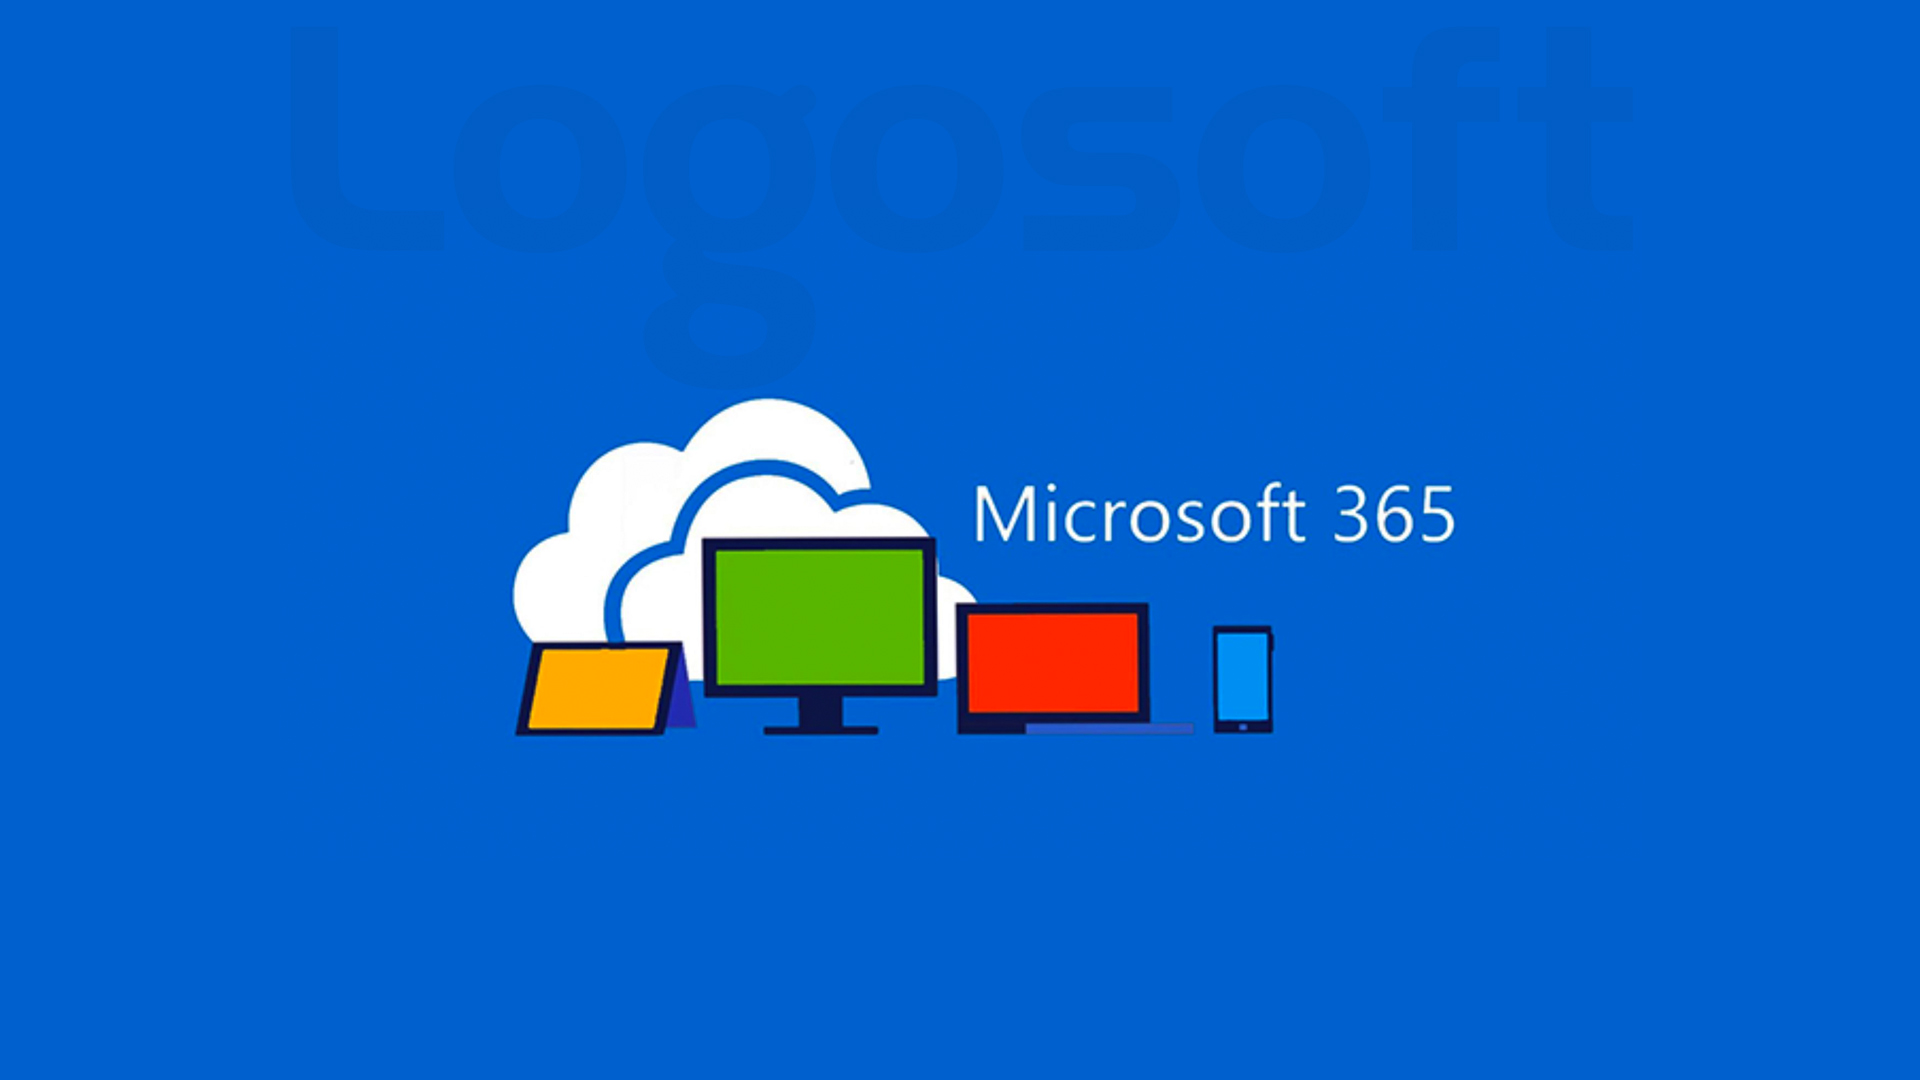 The 7 Benefits of Microsoft 365 for Business